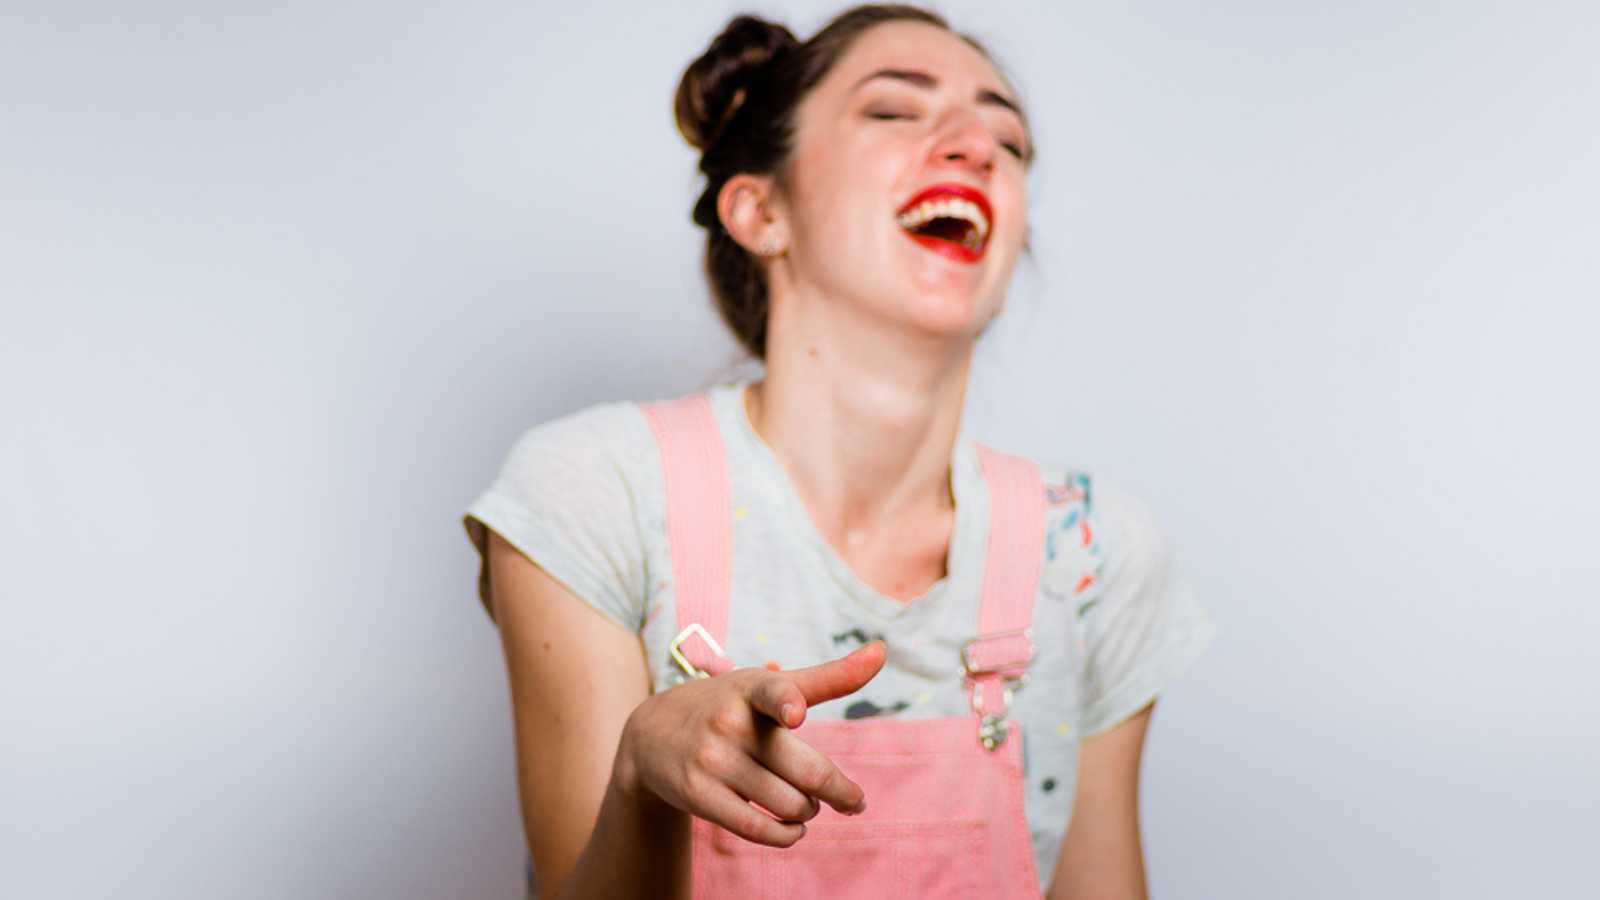 Woman Pointing And Laughing